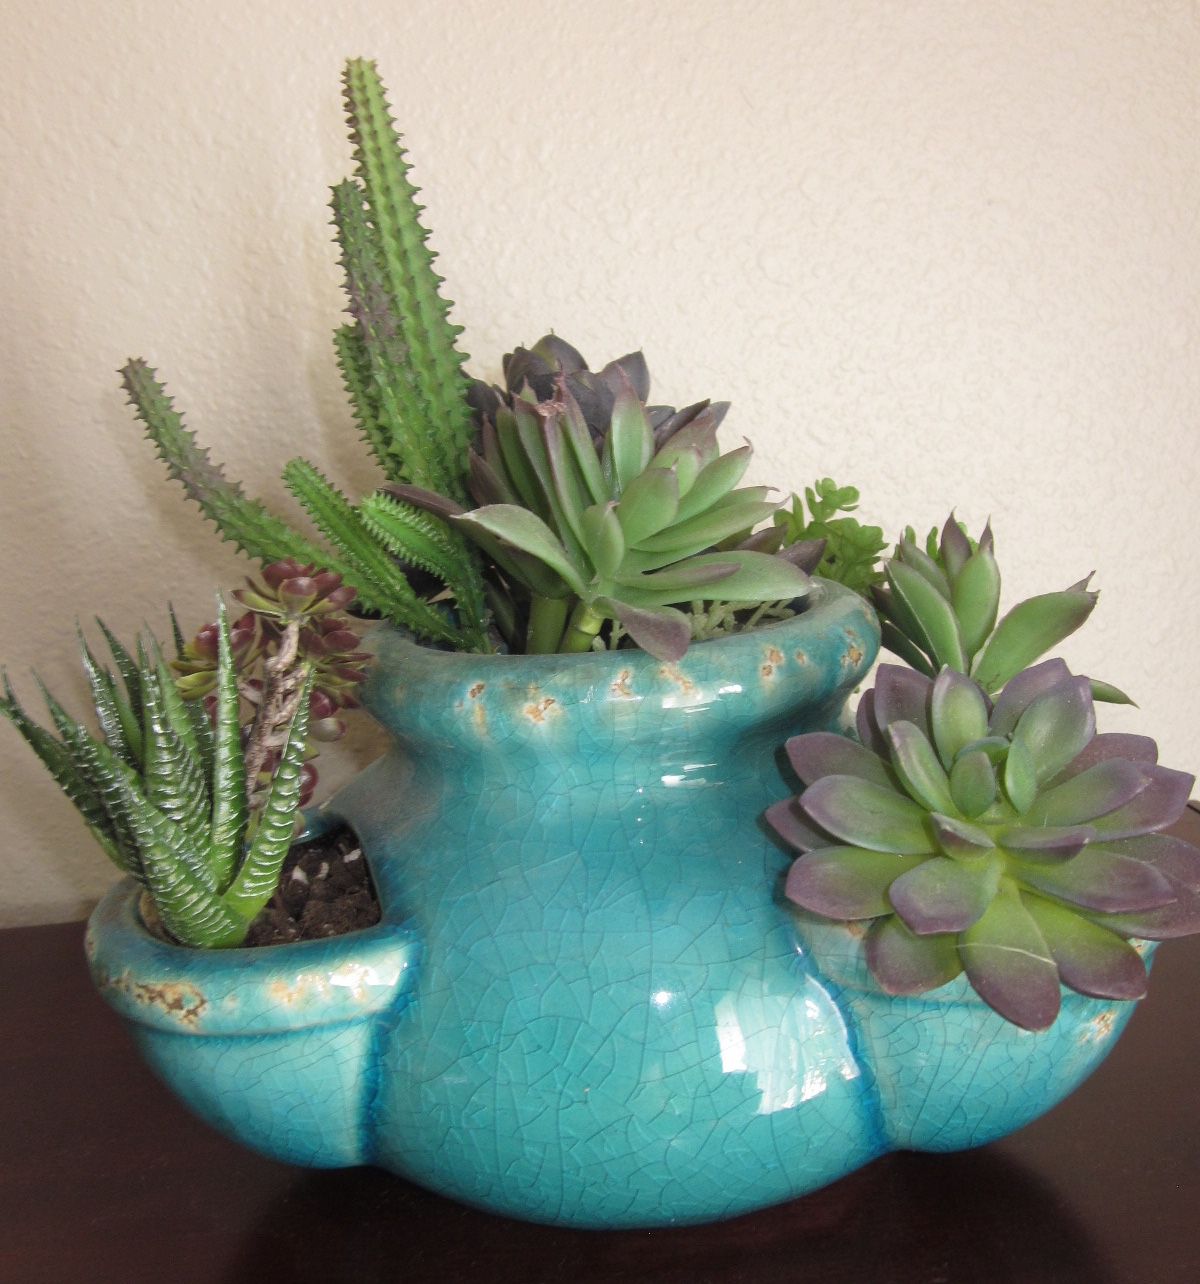 Teal ceramic vase with artificial succulents